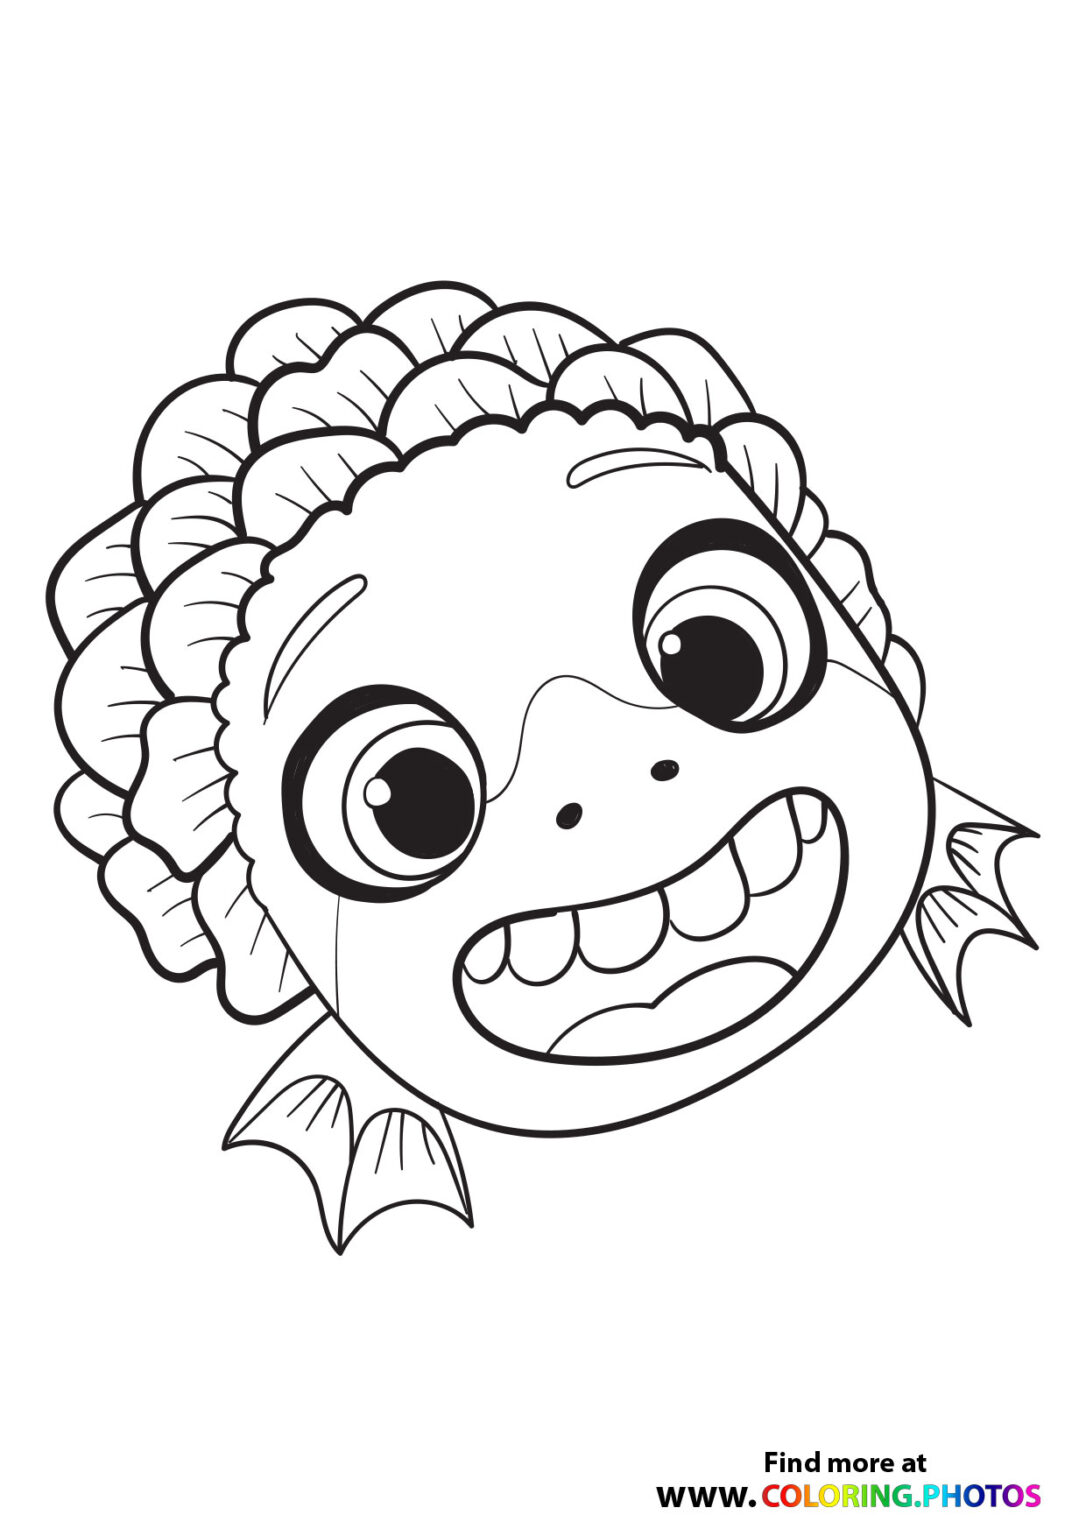 Mirabel Madrigal   Encanto   Coloring Pages for kids